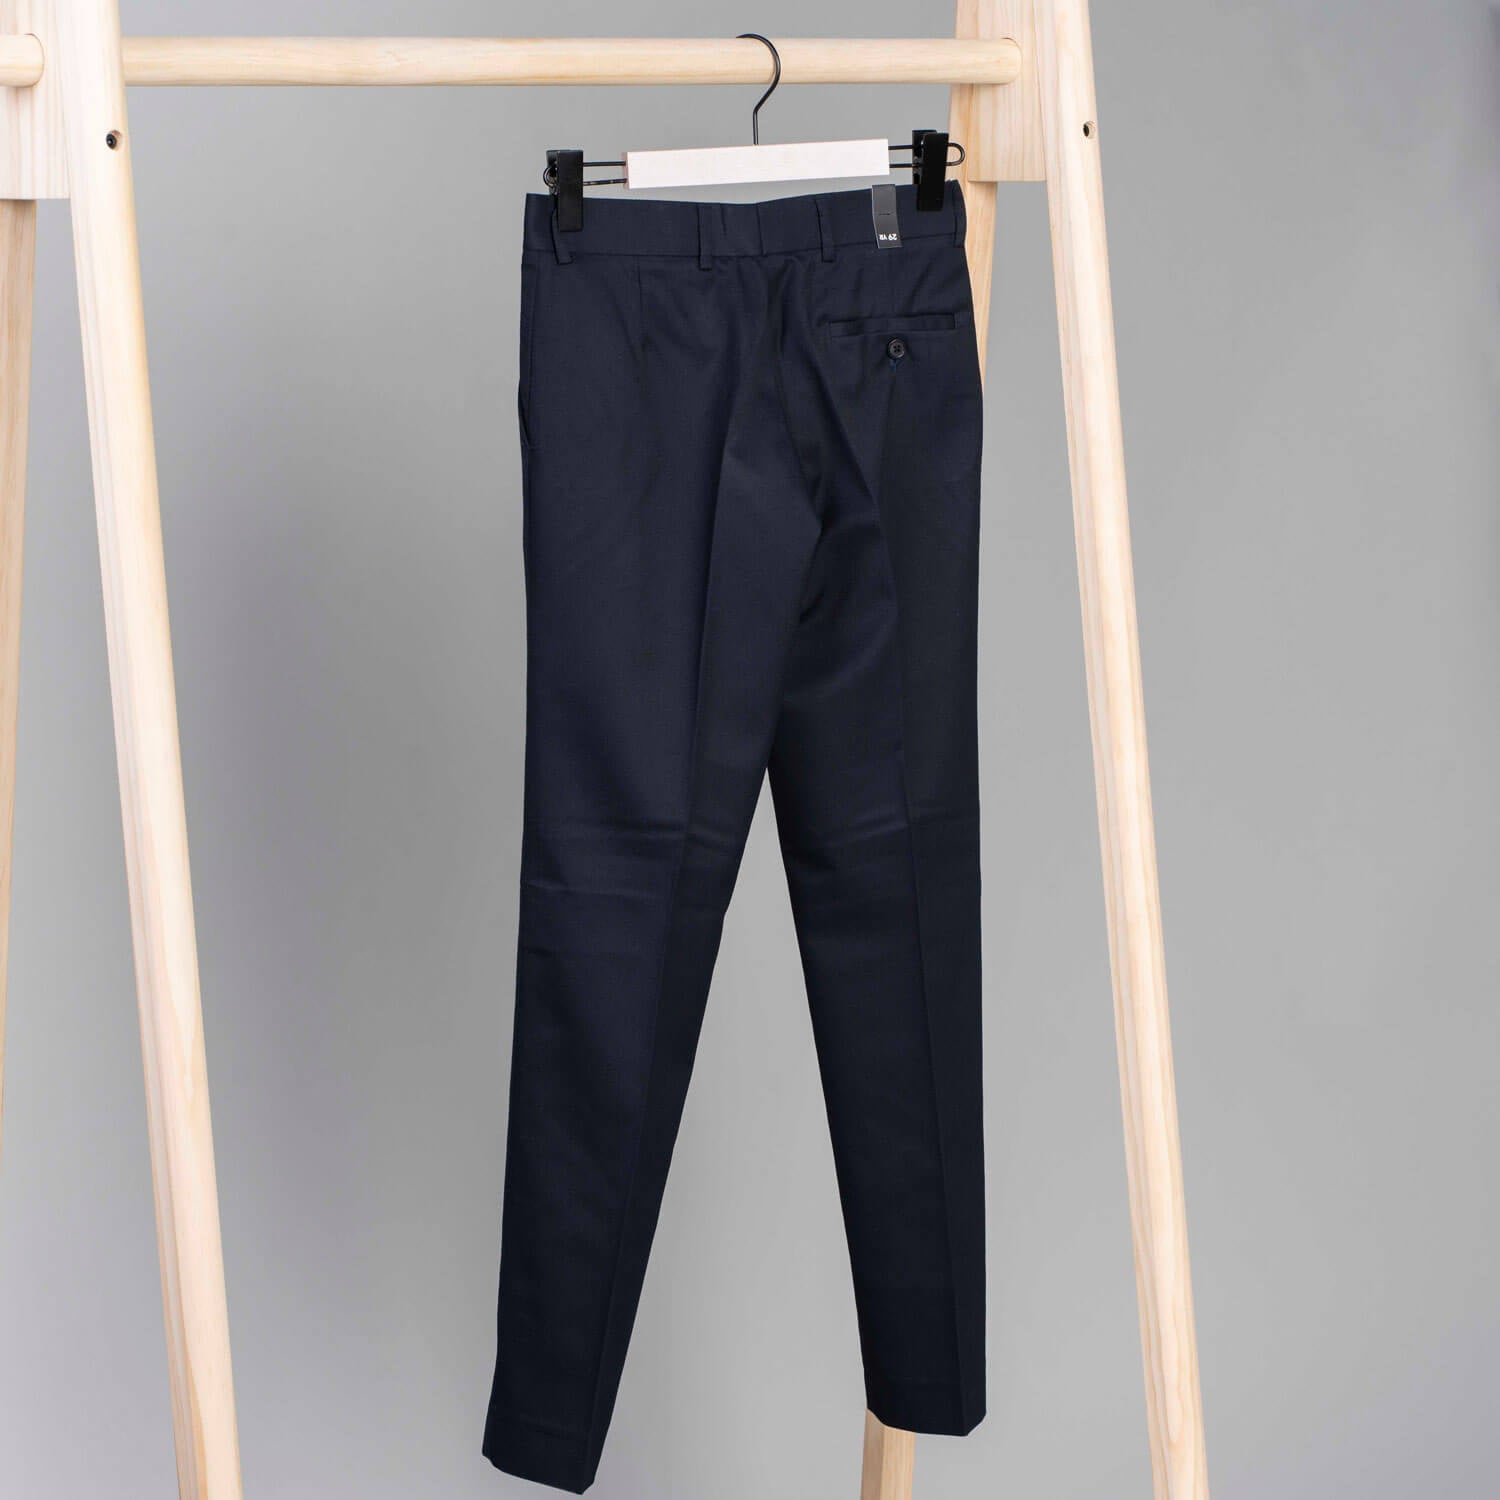 Blue Dot Lewis Youth Boys Trousers - Navy 2 Shaws Department Stores